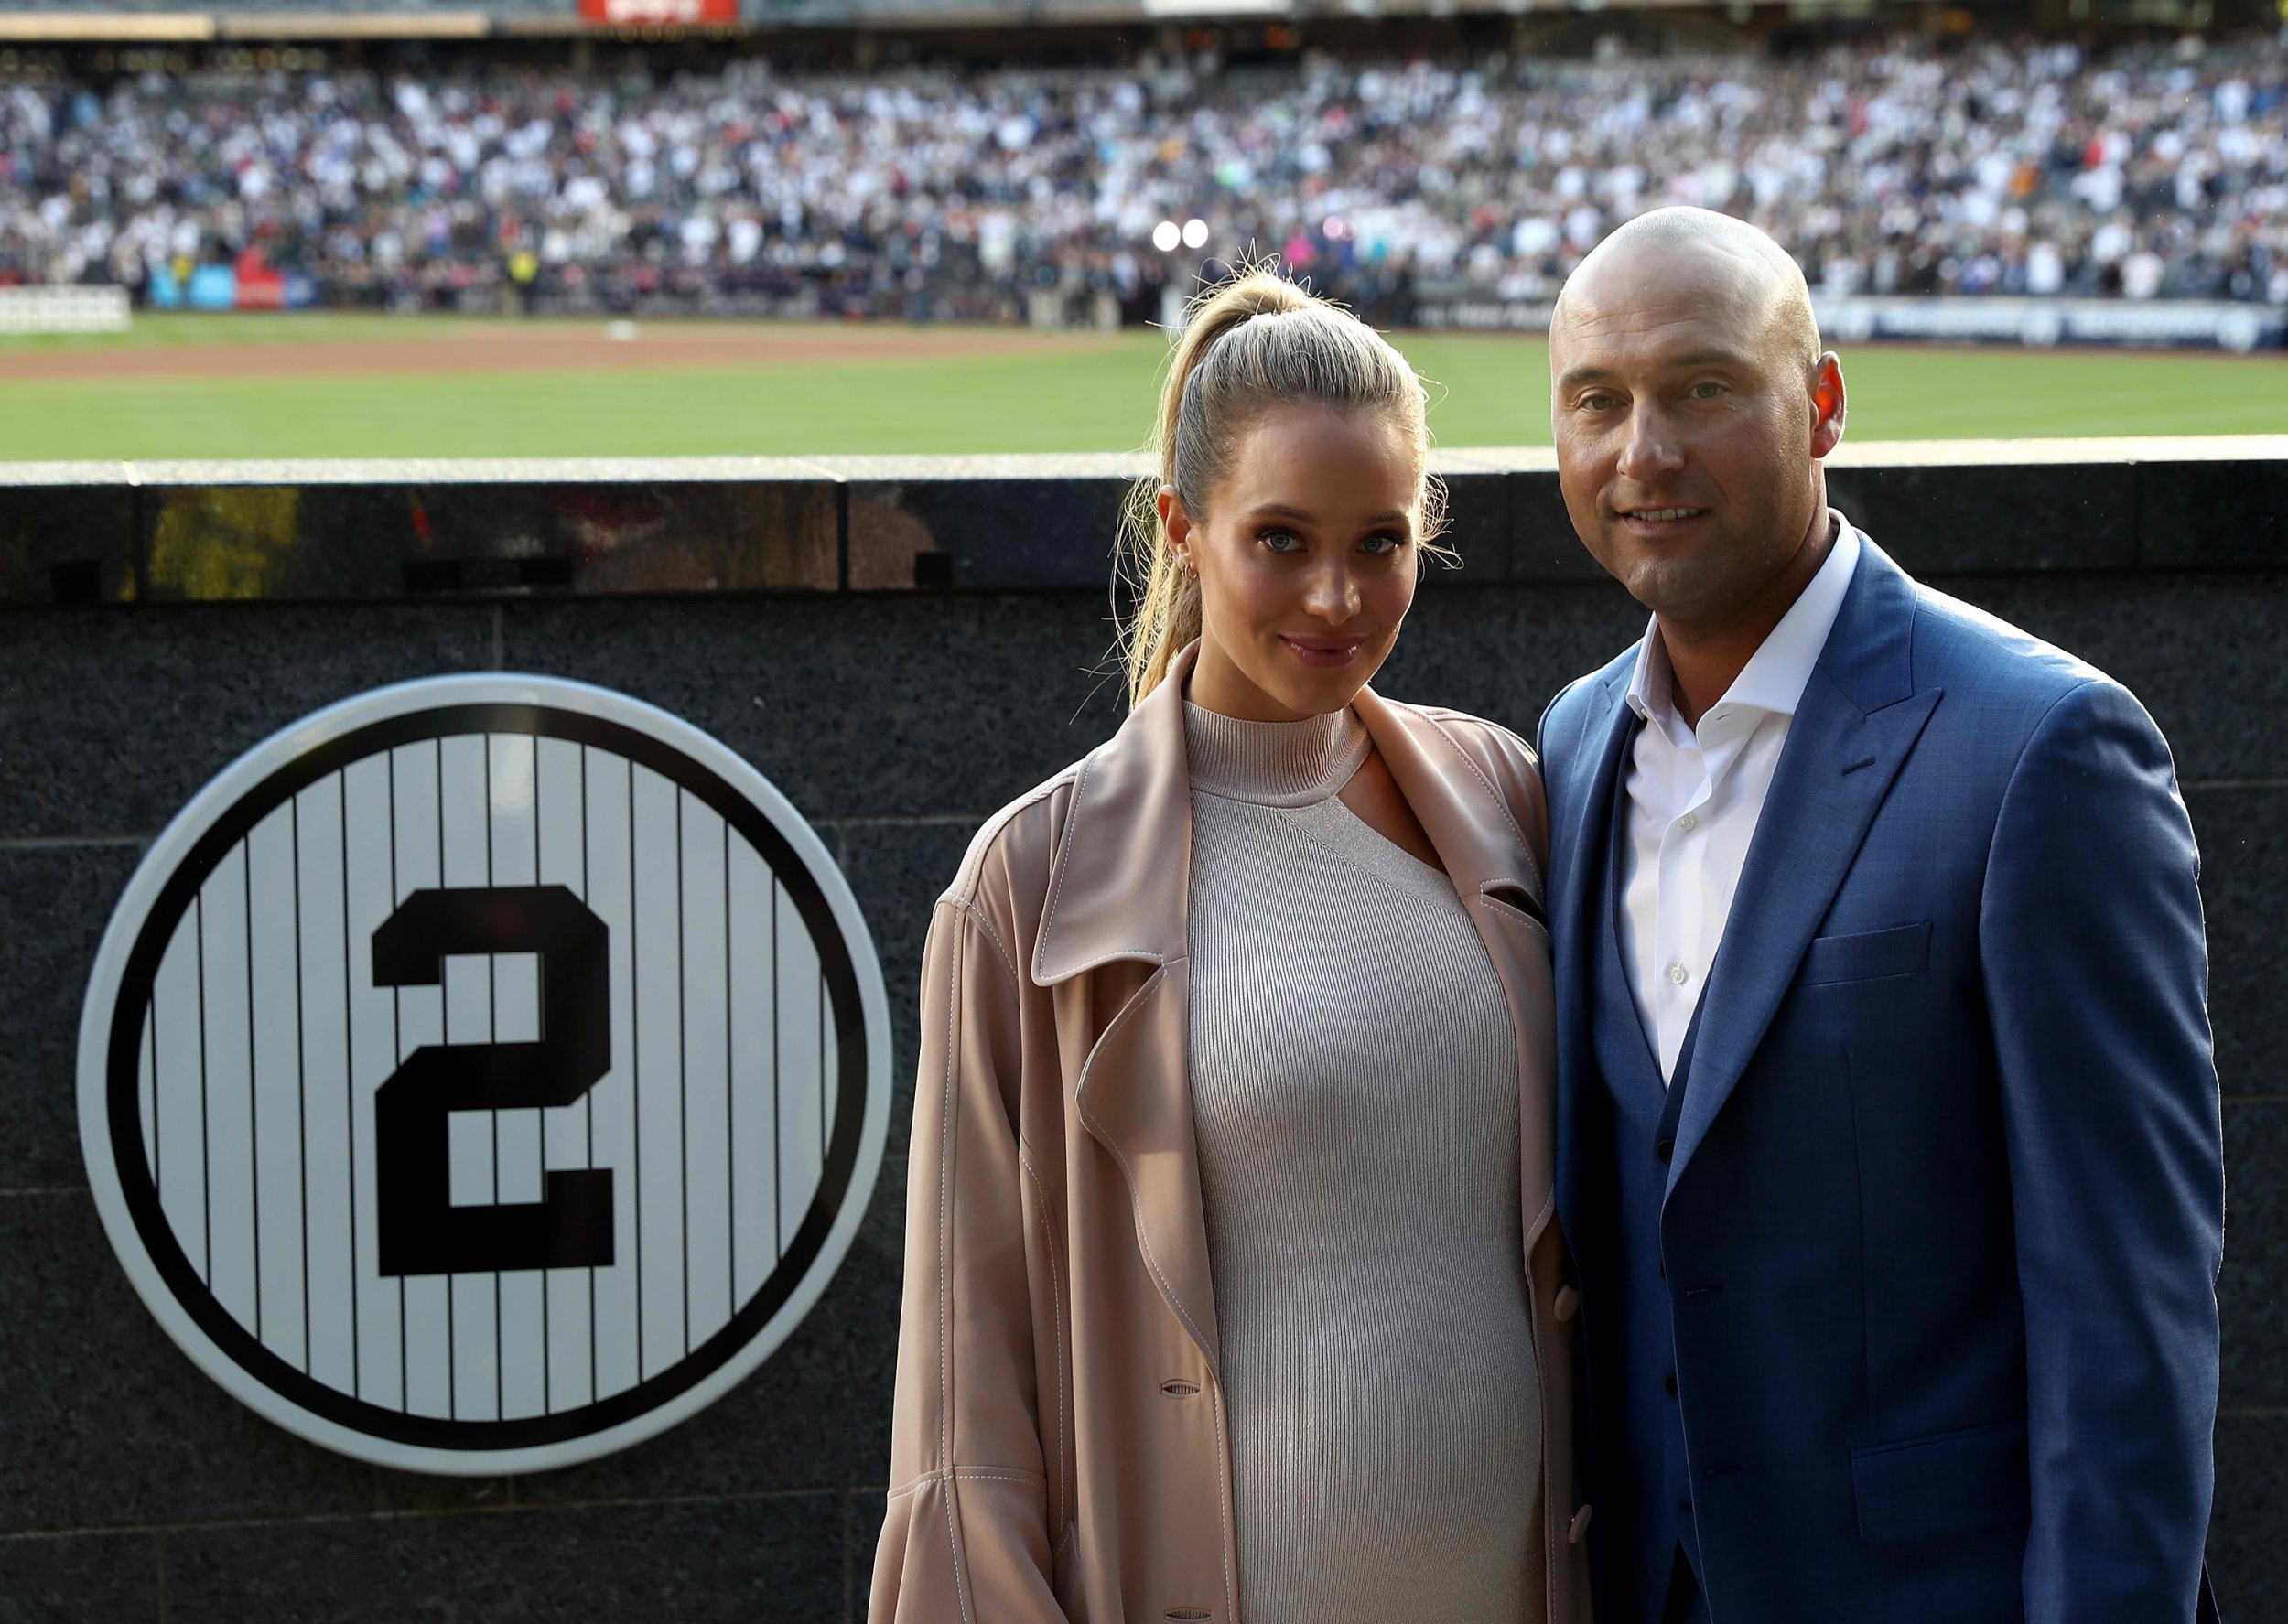 Derek Jeter's Daughters Join Him at Hall of Fame Induction Ceremony